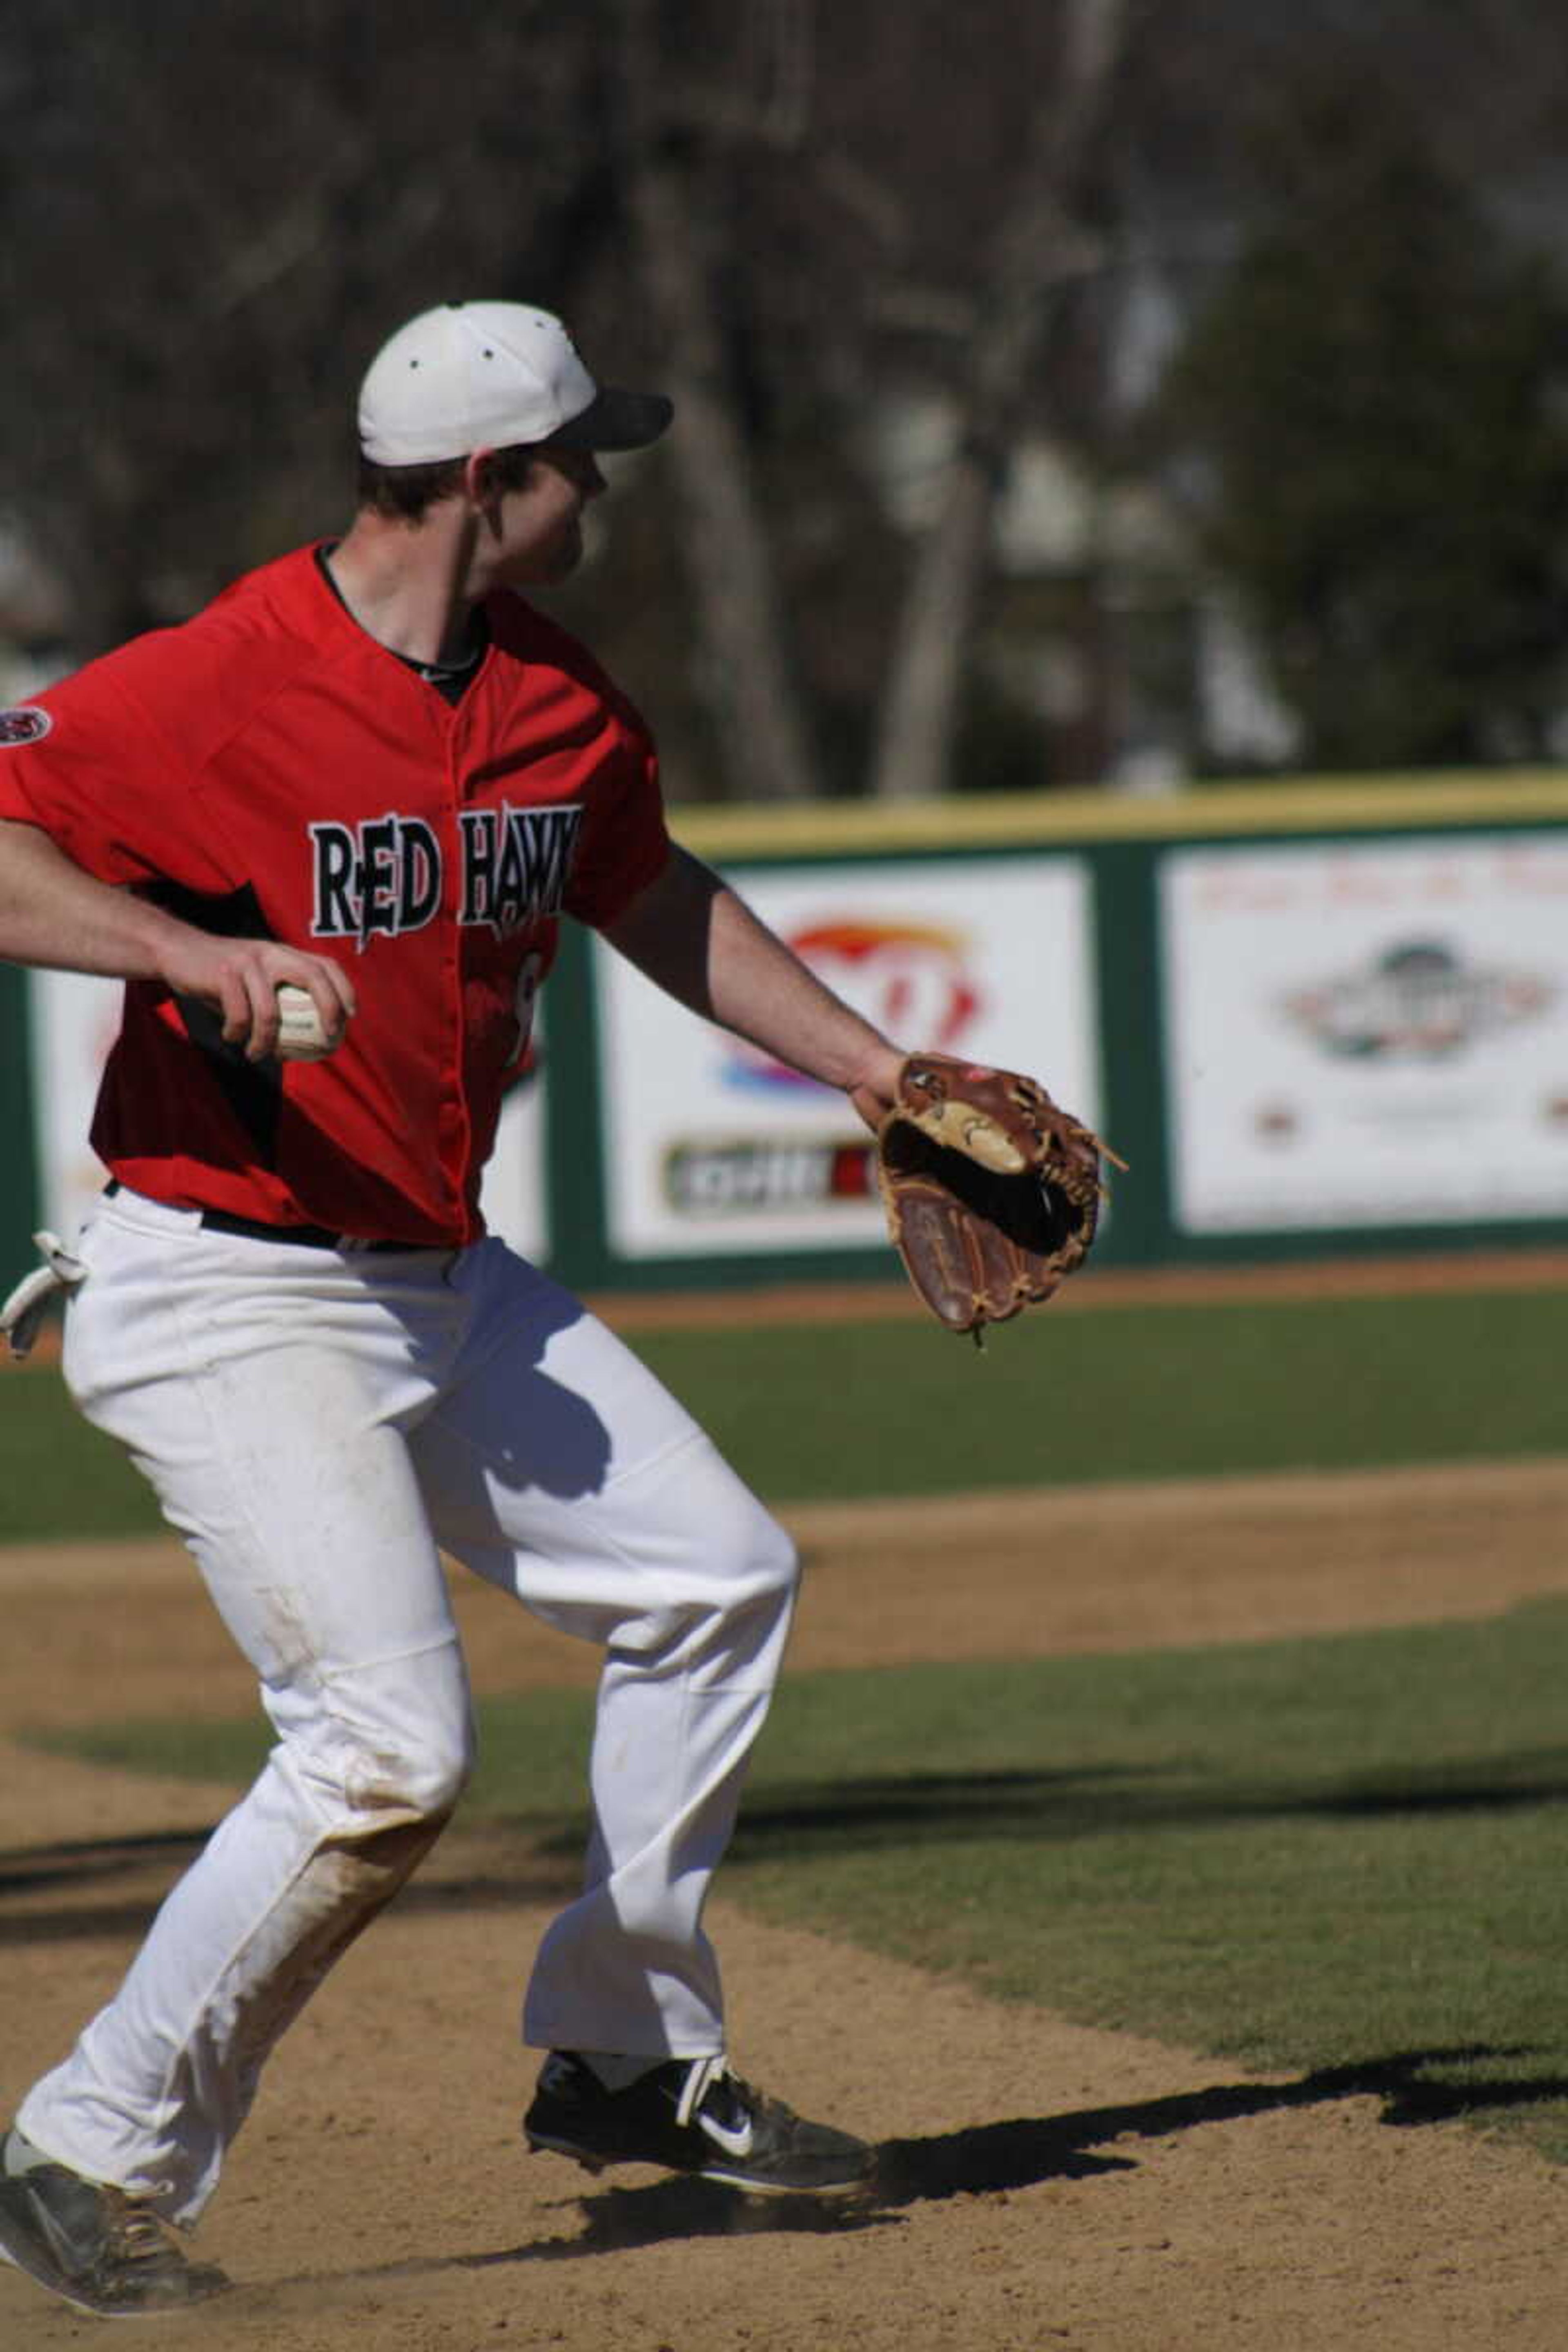 Trenton Moses throws the baseball to Southeast's first baseman during a 
game on Feb. 25. - Photo by Nathan Hamilton